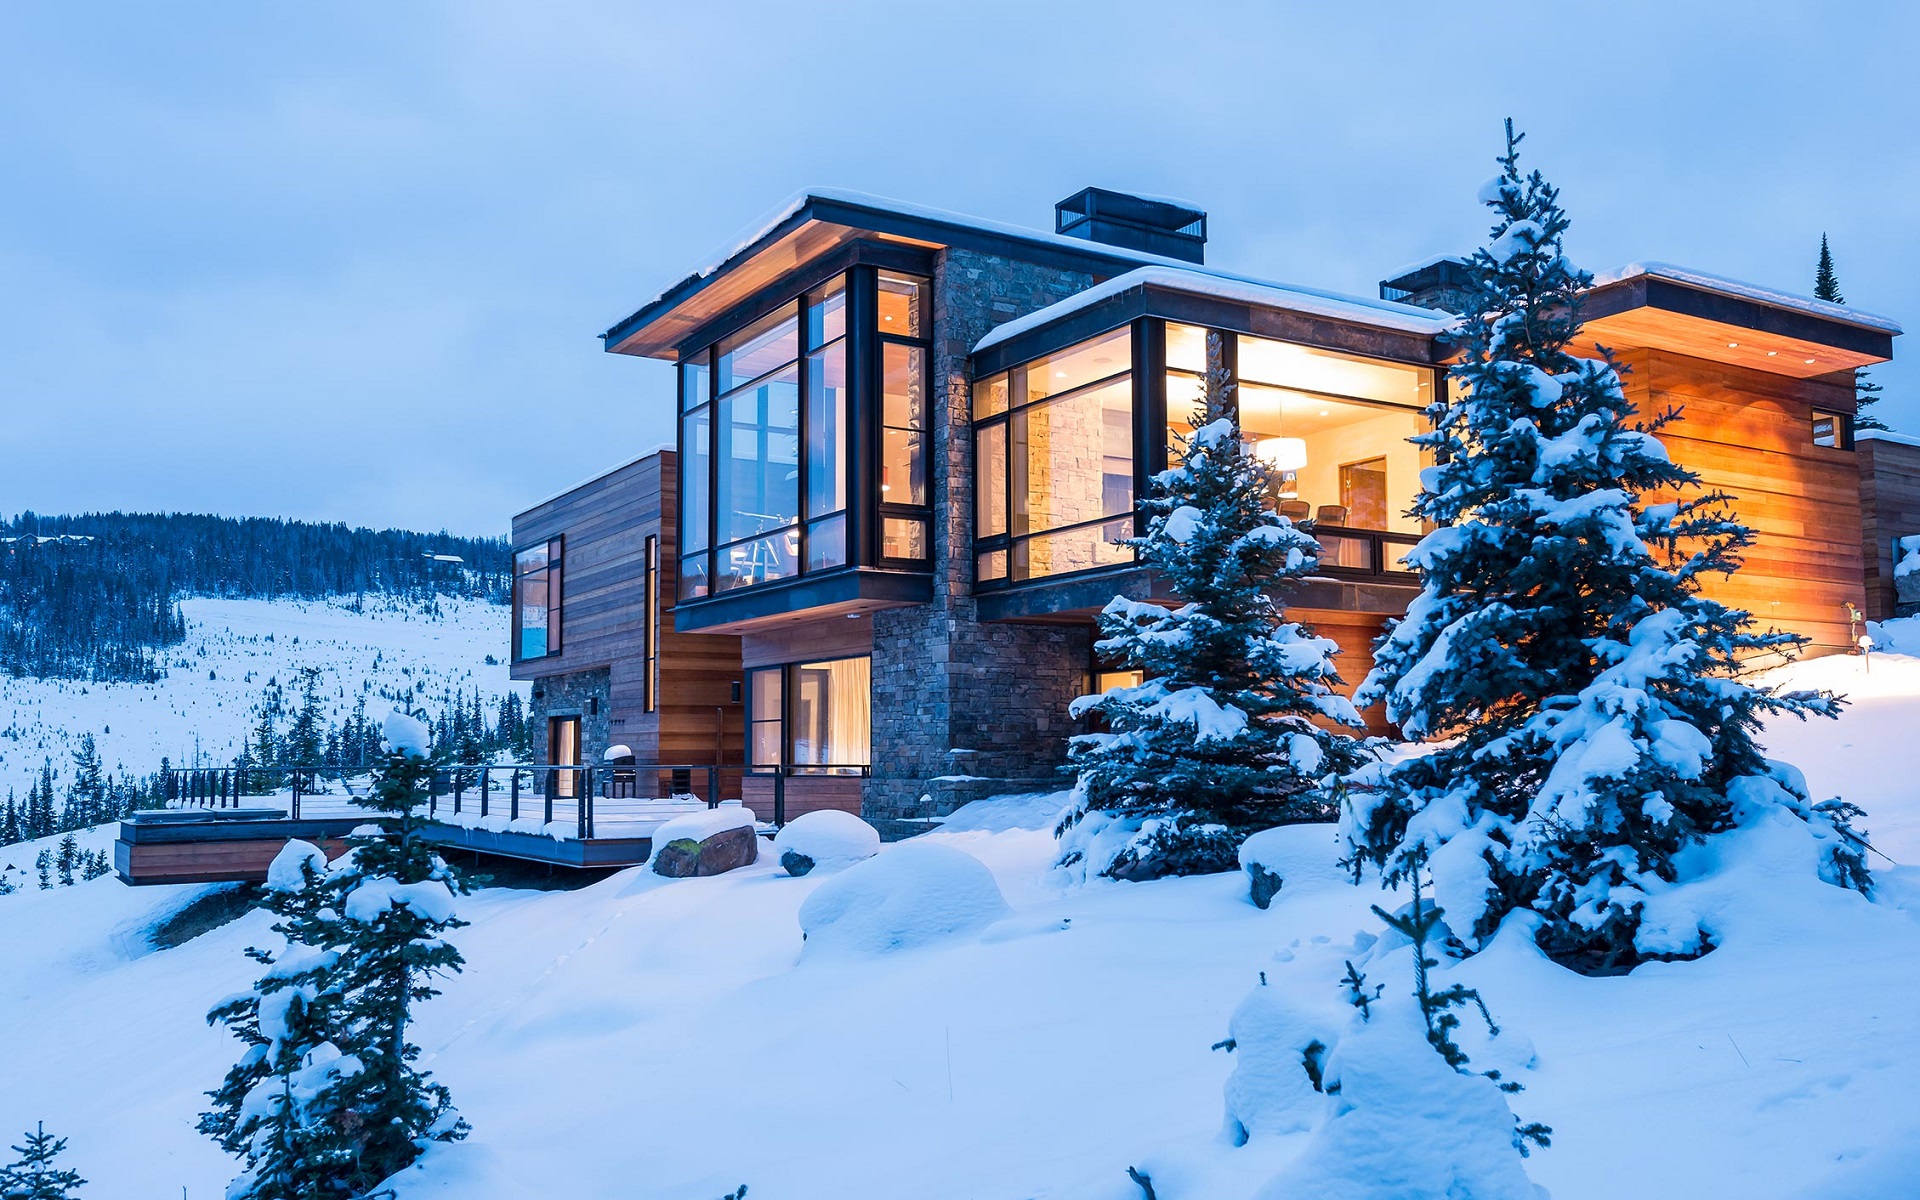 house, Modern, Winter, Snow, Trees, Building, Architecture Wallpaper